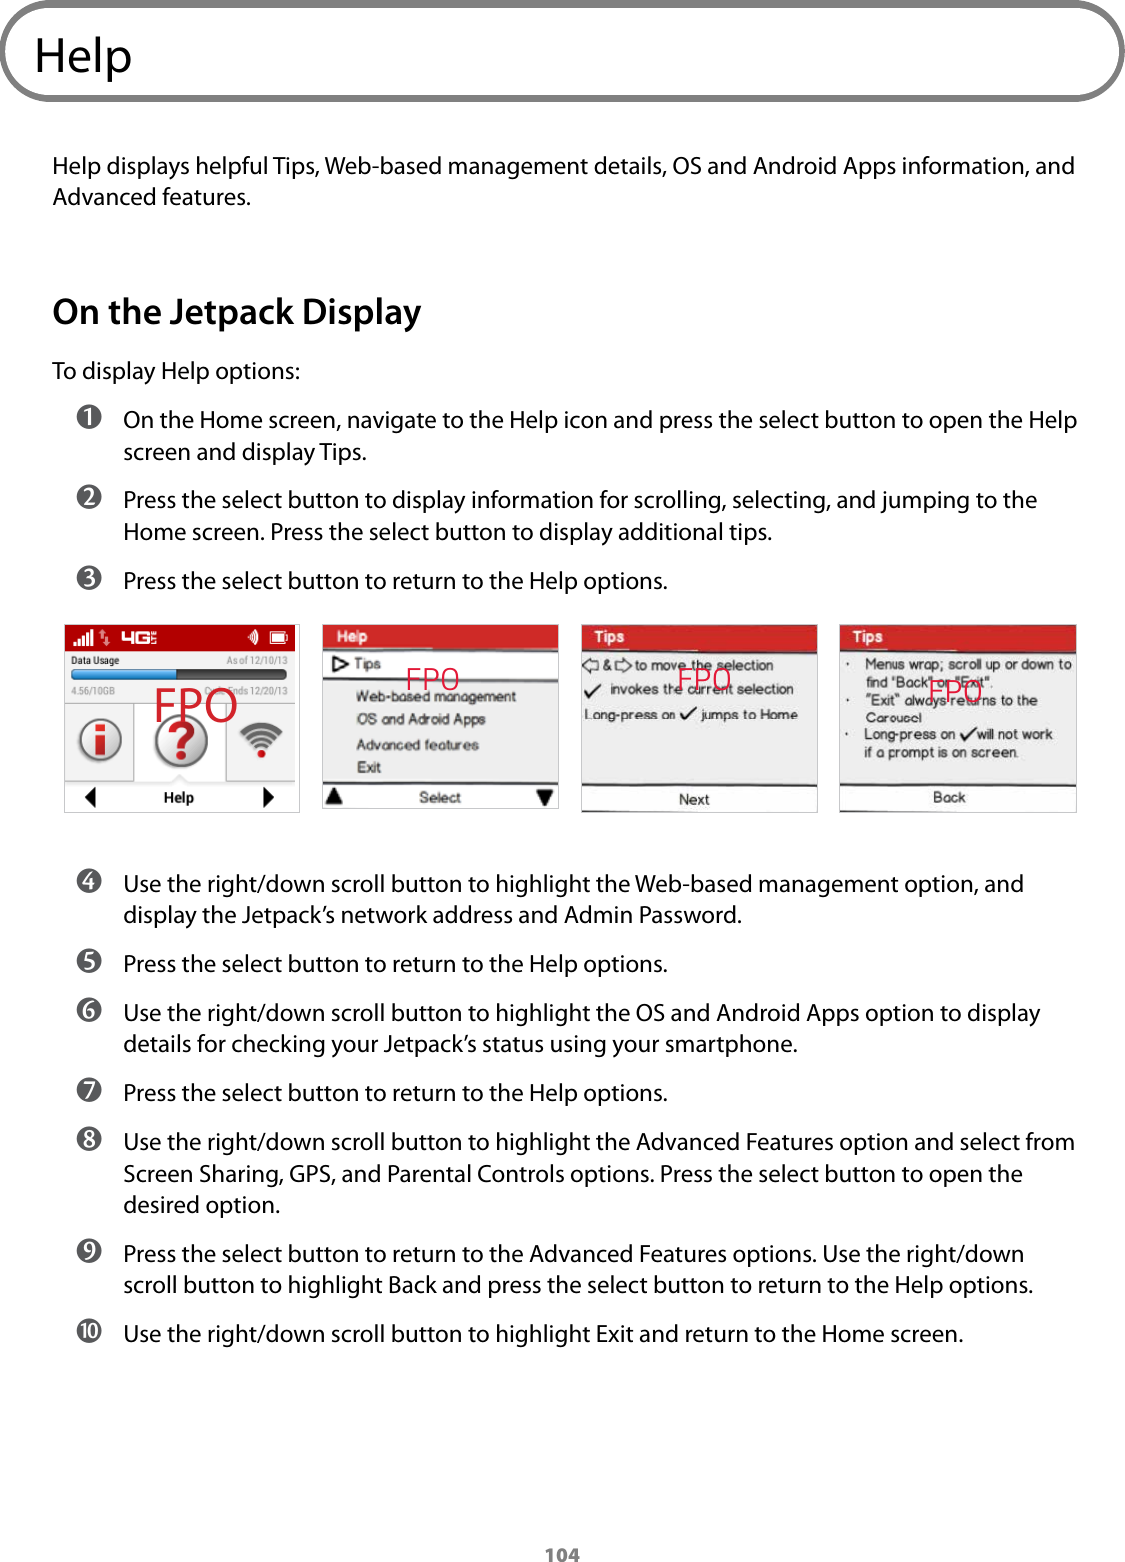 104HelpHelp displays helpful Tips, Web-based management details, OS and Android Apps information, and Advanced features. On the Jetpack DisplayTo display Help options: ➊ On the Home screen, navigate to the Help icon and press the select button to open the Help screen and display Tips. ➋ Press the select button to display information for scrolling, selecting, and jumping to the Home screen. Press the select button to display additional tips. ➌ Press the select button to return to the Help options. ➍ Use the right/down scroll button to highlight the Web-based management option, and display the Jetpack’s network address and Admin Password. ➎ Press the select button to return to the Help options. ➏ Use the right/down scroll button to highlight the OS and Android Apps option to display details for checking your Jetpack’s status using your smartphone. ➐ Press the select button to return to the Help options. ➑ Use the right/down scroll button to highlight the Advanced Features option and select from Screen Sharing, GPS, and Parental Controls options. Press the select button to open the desired option. ➒ Press the select button to return to the Advanced Features options. Use the right/down scroll button to highlight Back and press the select button to return to the Help options.  ➓ Use the right/down scroll button to highlight Exit and return to the Home screen.FPO FPO FPOFPO